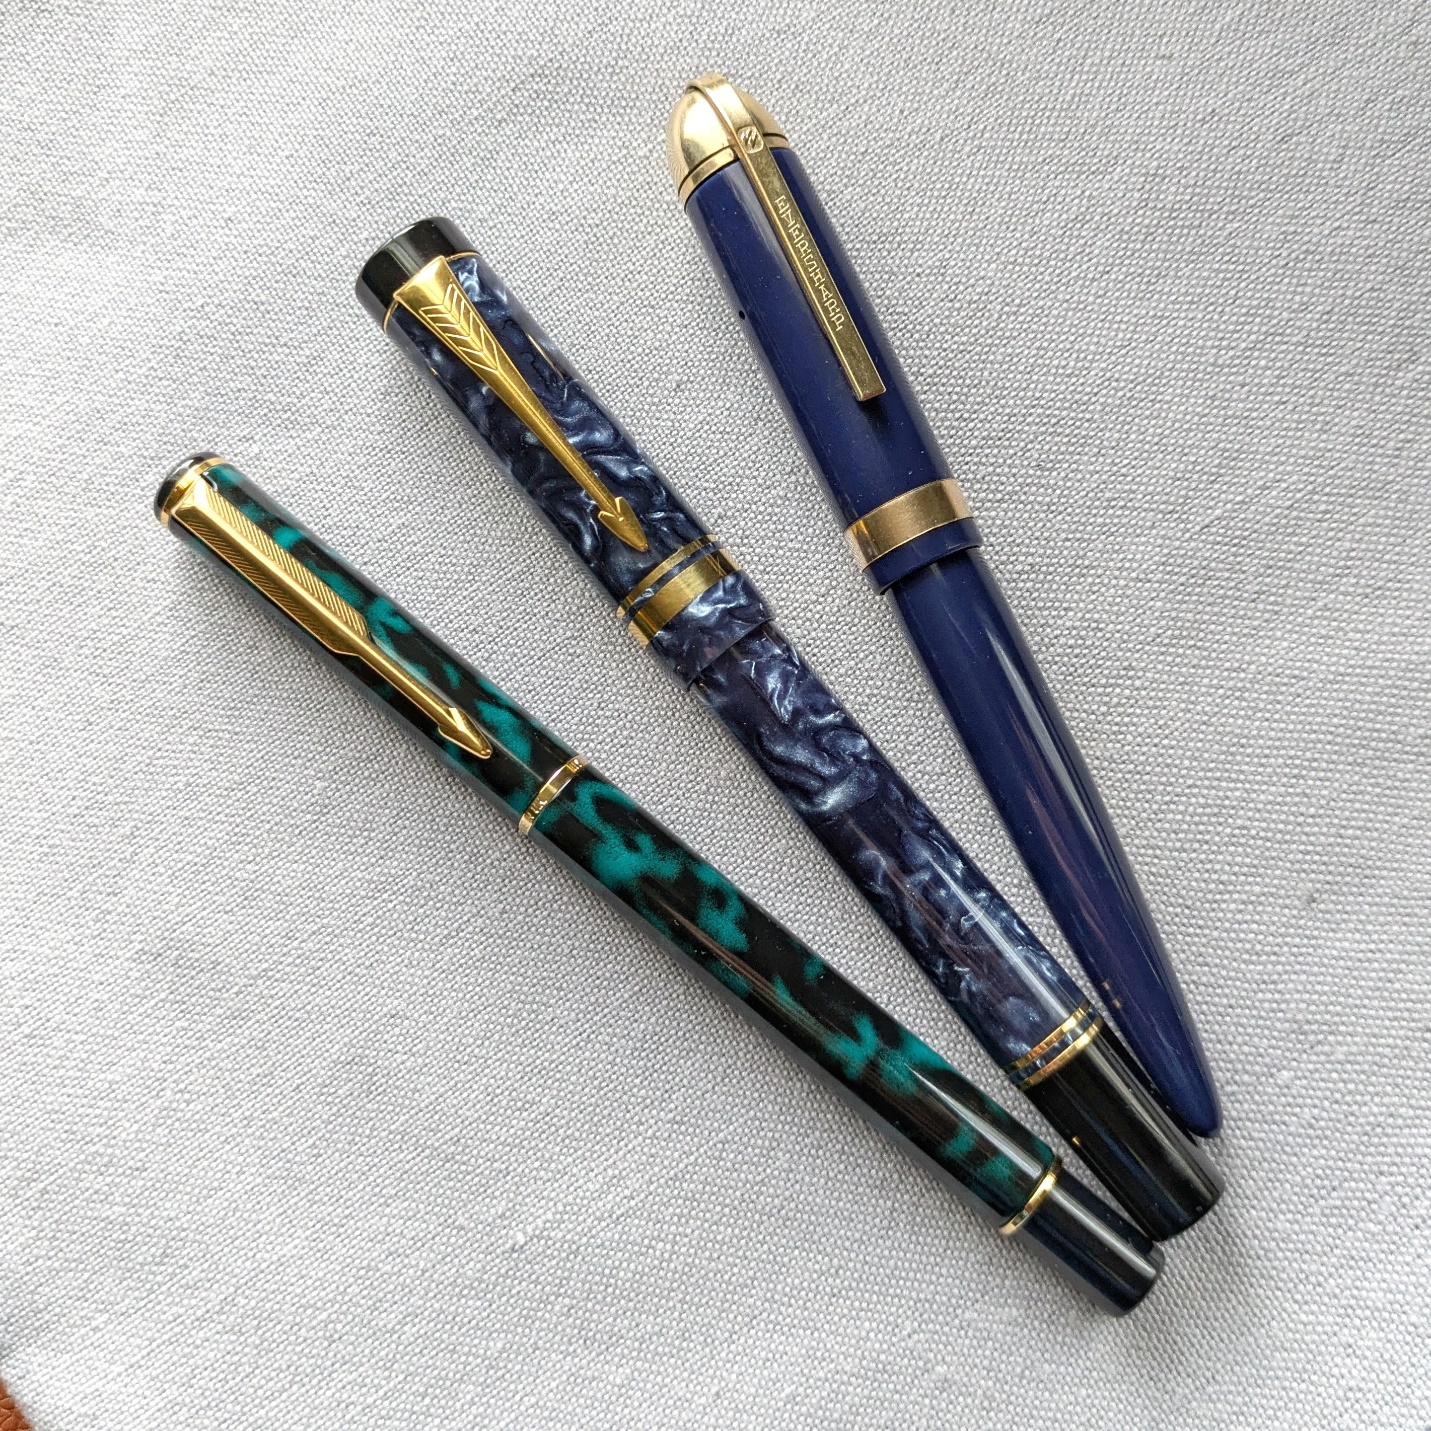 My trim preference is usually silver over gold, but with blue pens gold is hard to beat. 